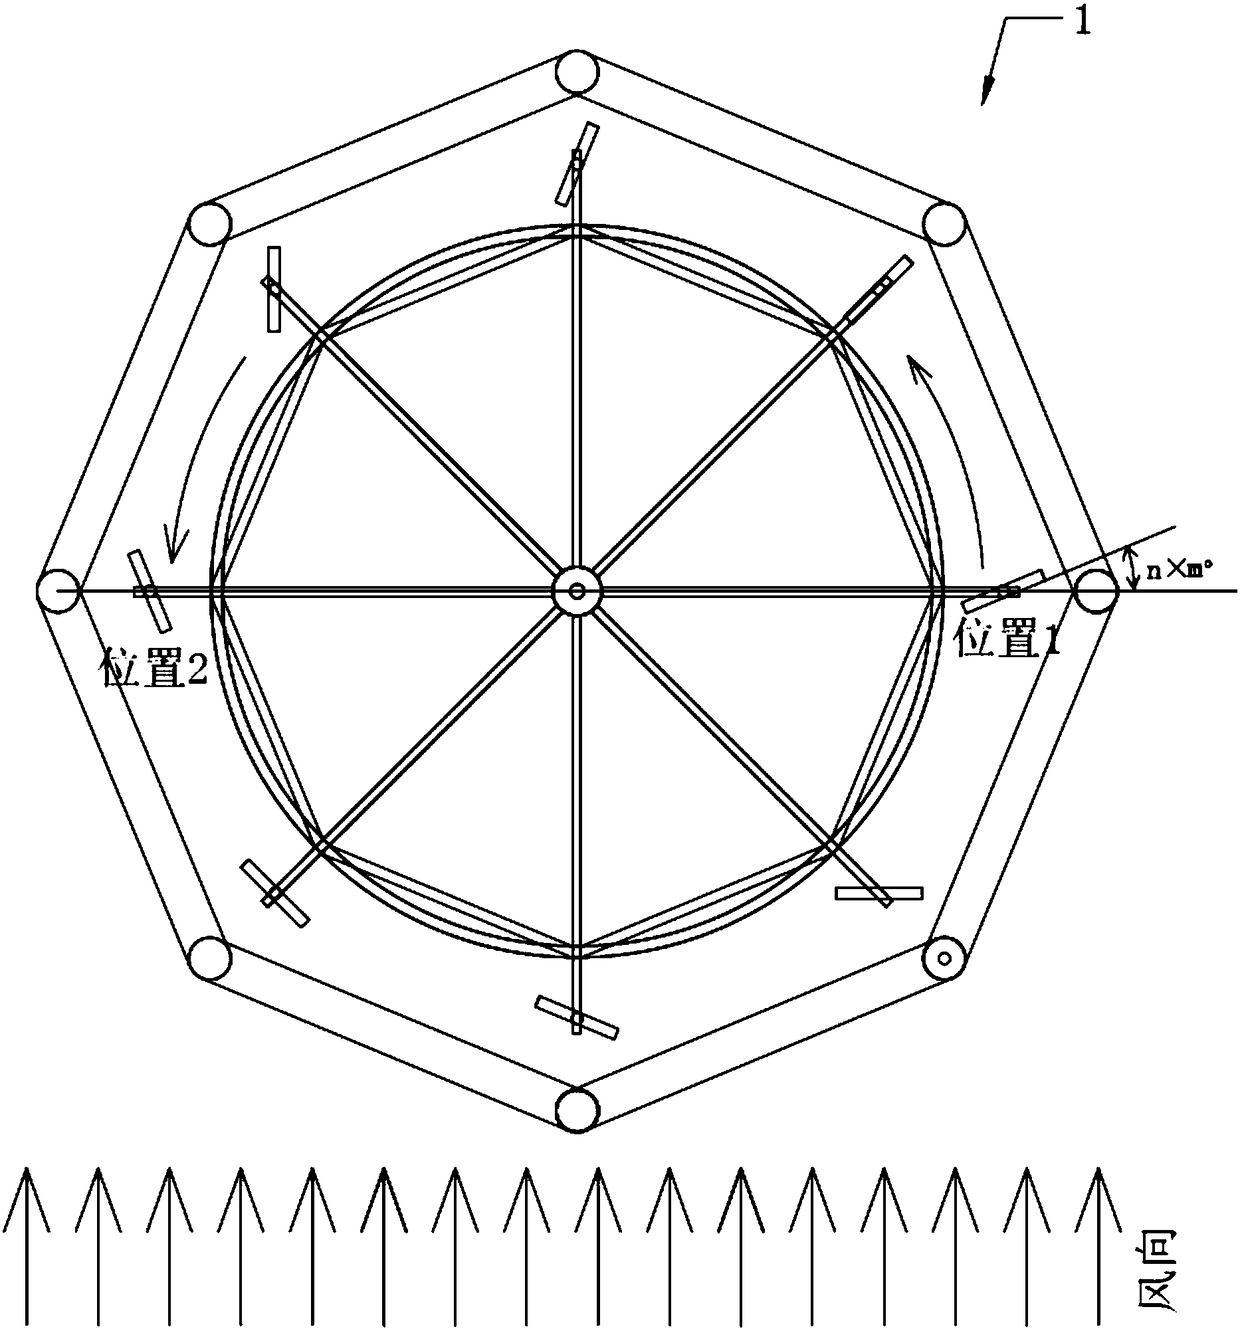 Real-time variable-pitch wind wheel and vertical-axis wind turbine